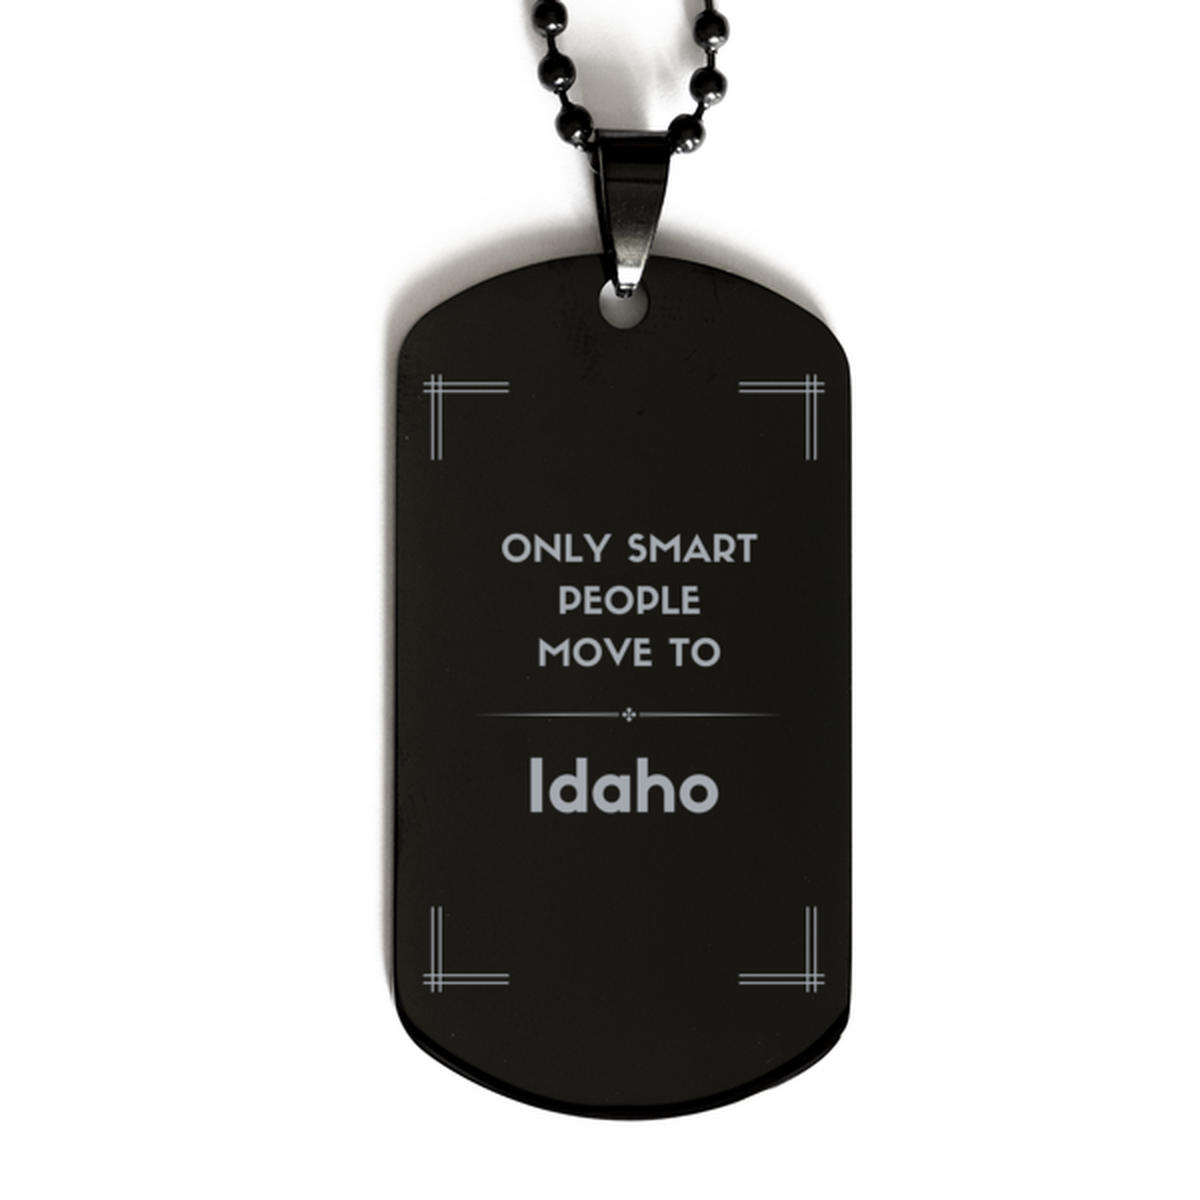 Only smart people move to Idaho Black Dog Tag, Gag Gifts For Idaho, Move to Idaho Gifts for Friends Coworker Funny Saying Quote